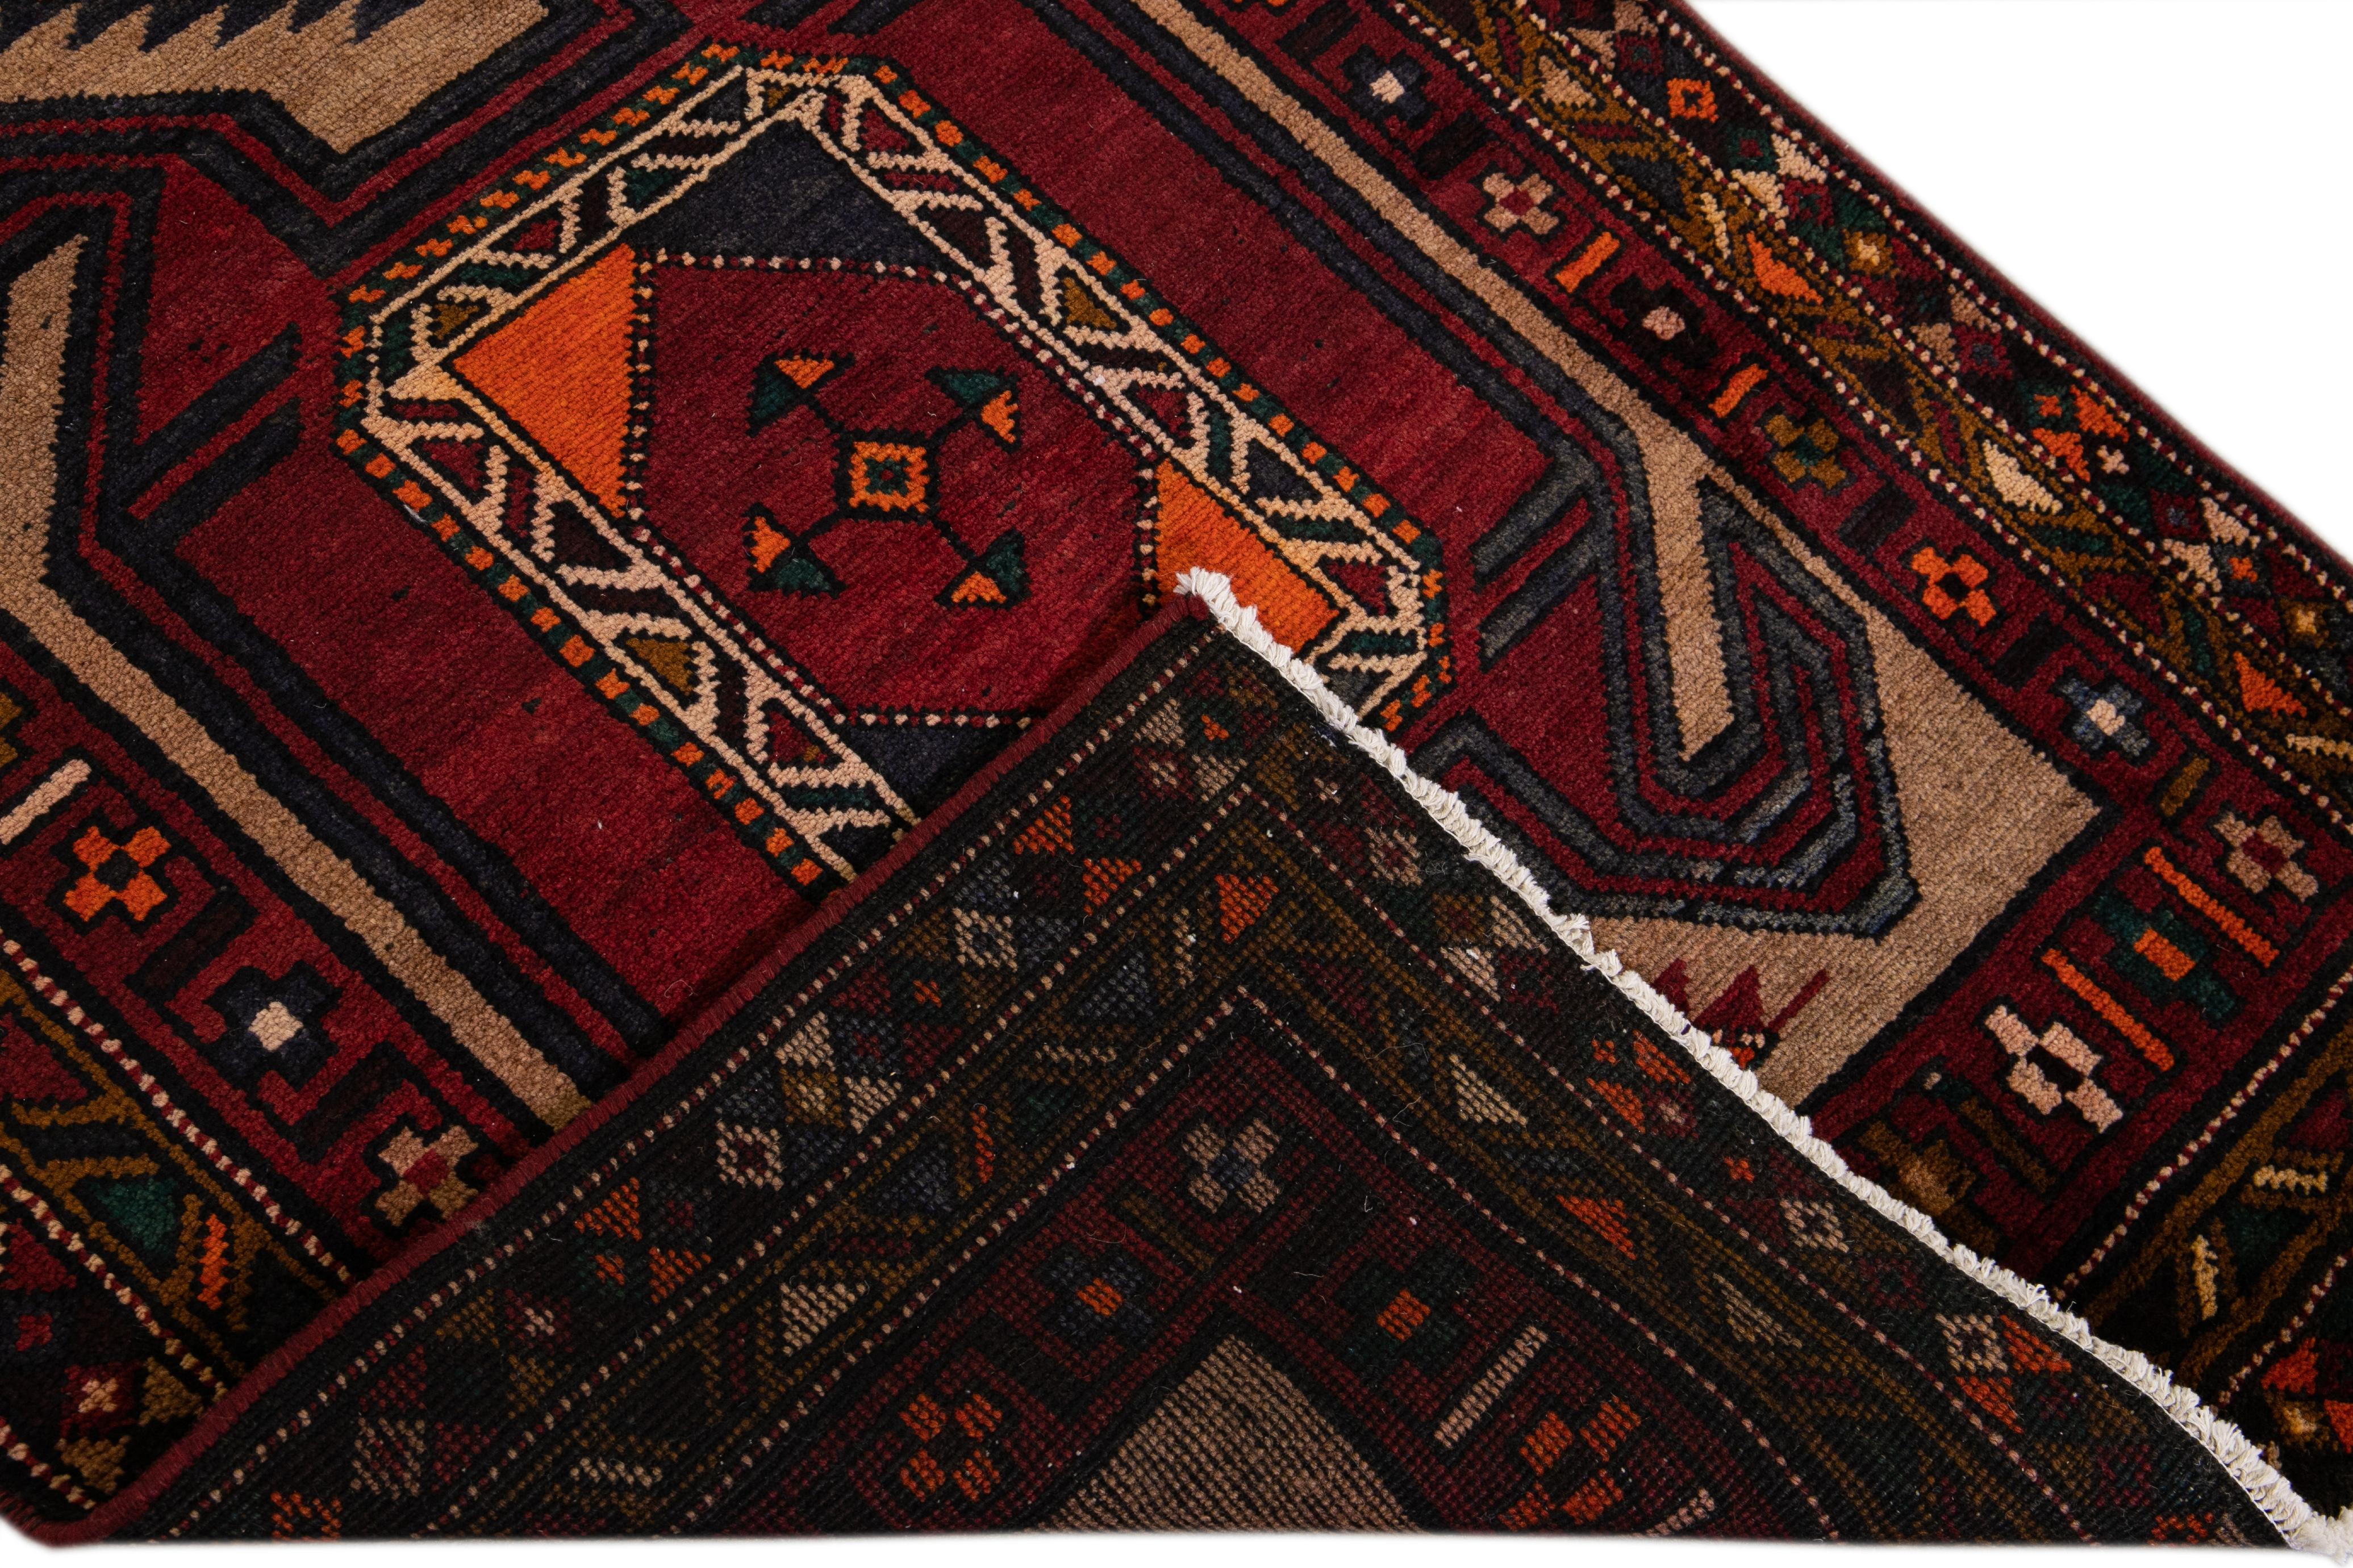 Beautiful vintage Heriz handmade wool runner with a brown field. This rug has red, orange, blue, and green accents in an all-over geometric design.

This rug measures: 3'6